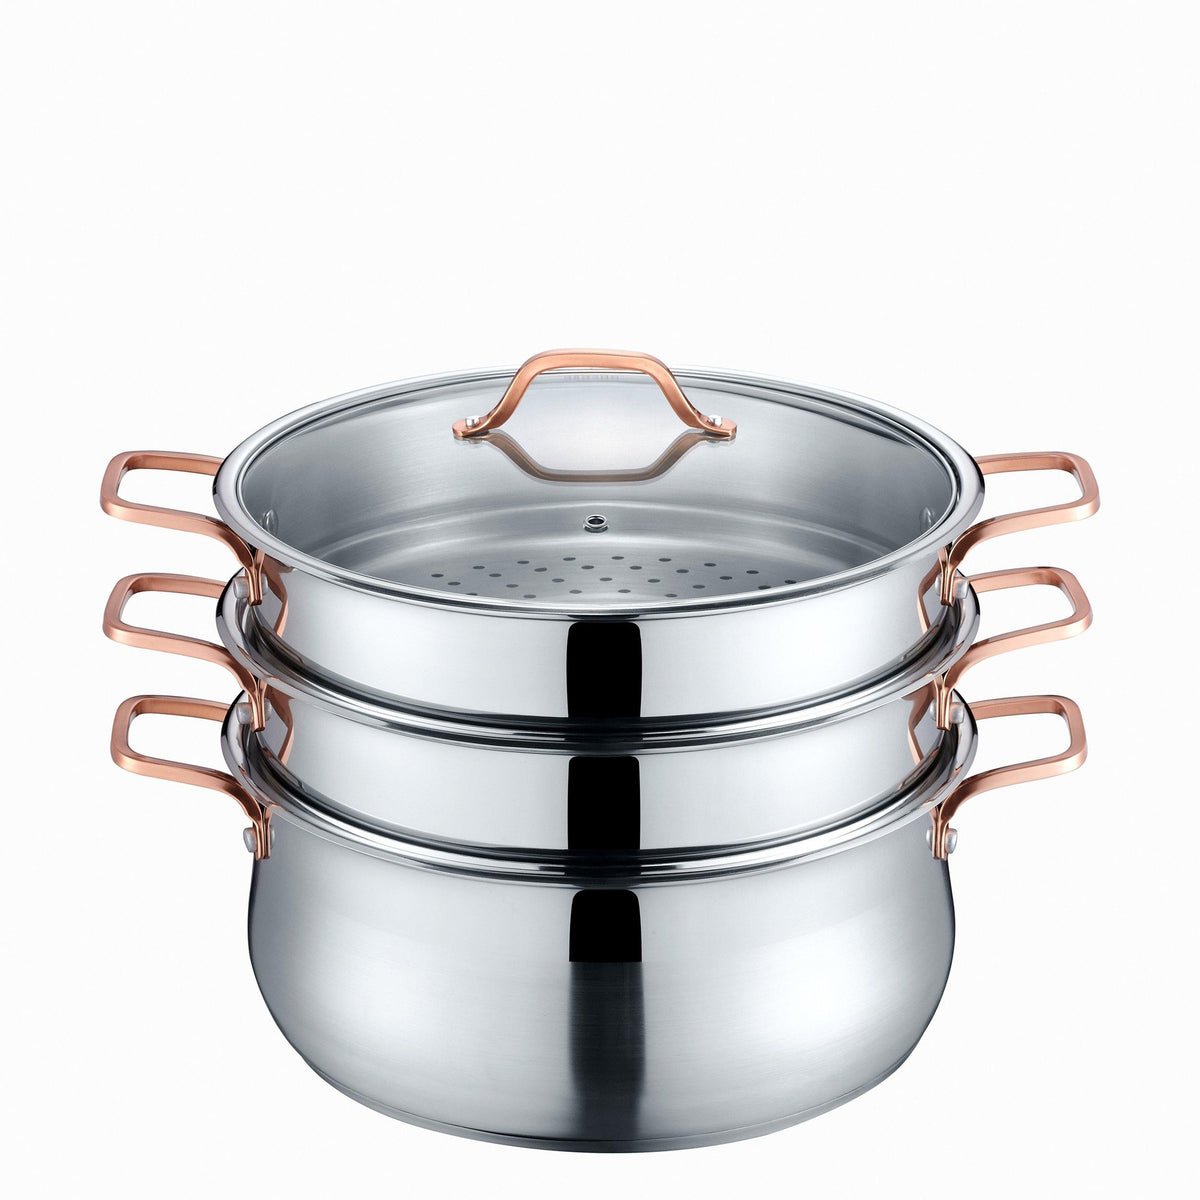 CONCORD Extra Large Outdoor Stainless Steel Stock Pot Steamer and Braiser  Combo. Great for steaming oysters, crab, crawfish and more (40 QT)